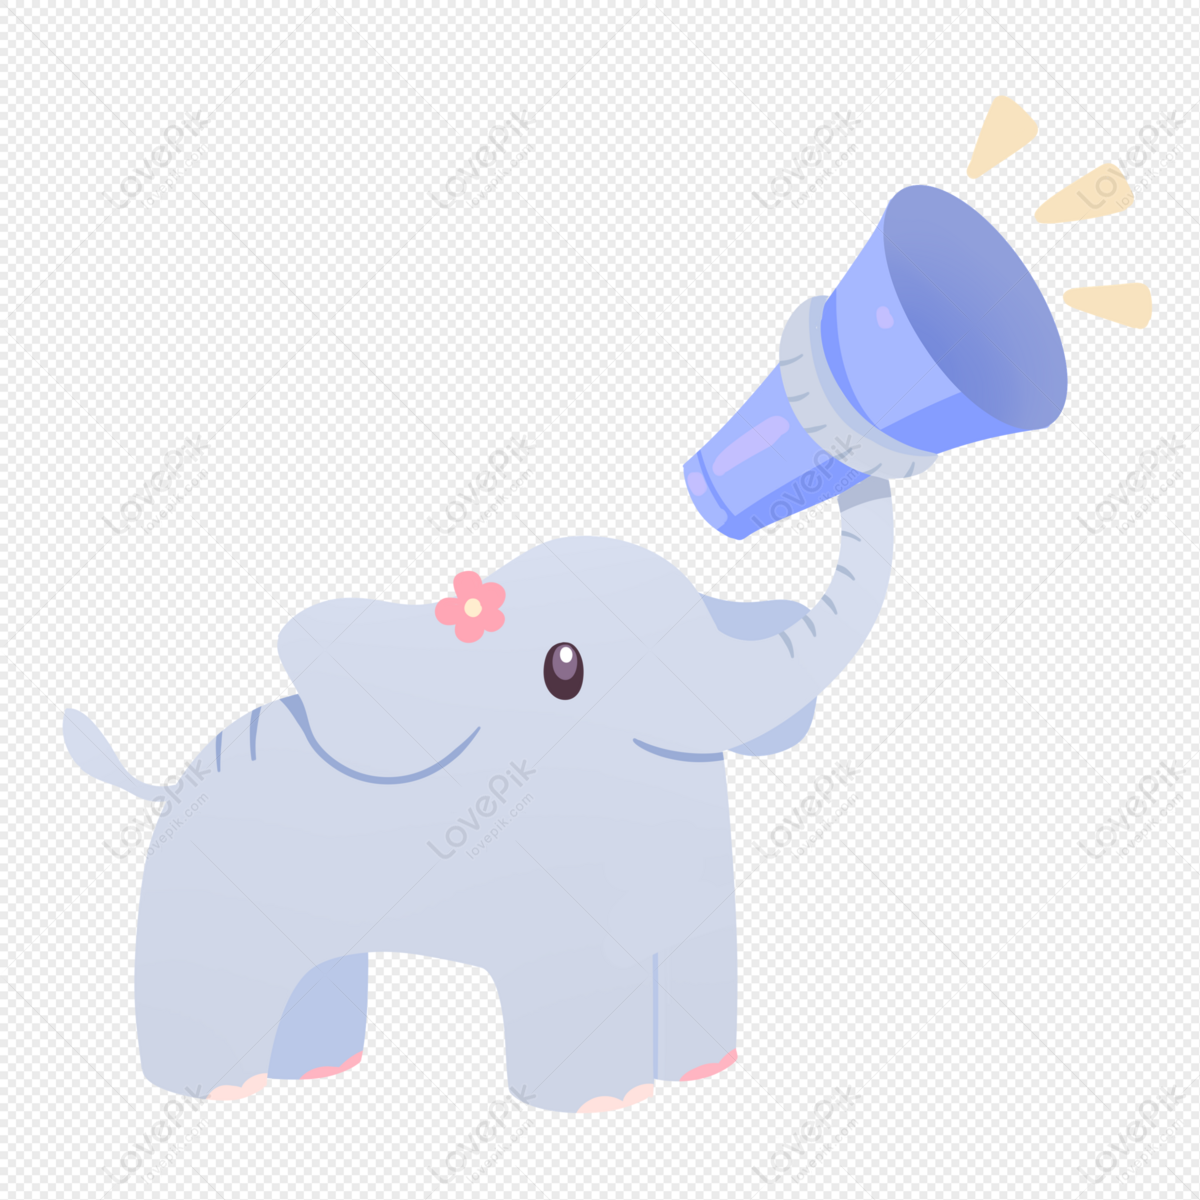 Baby Elephant With A Horn Free PNG And Clipart Image For Free Download -  Lovepik | 401500879